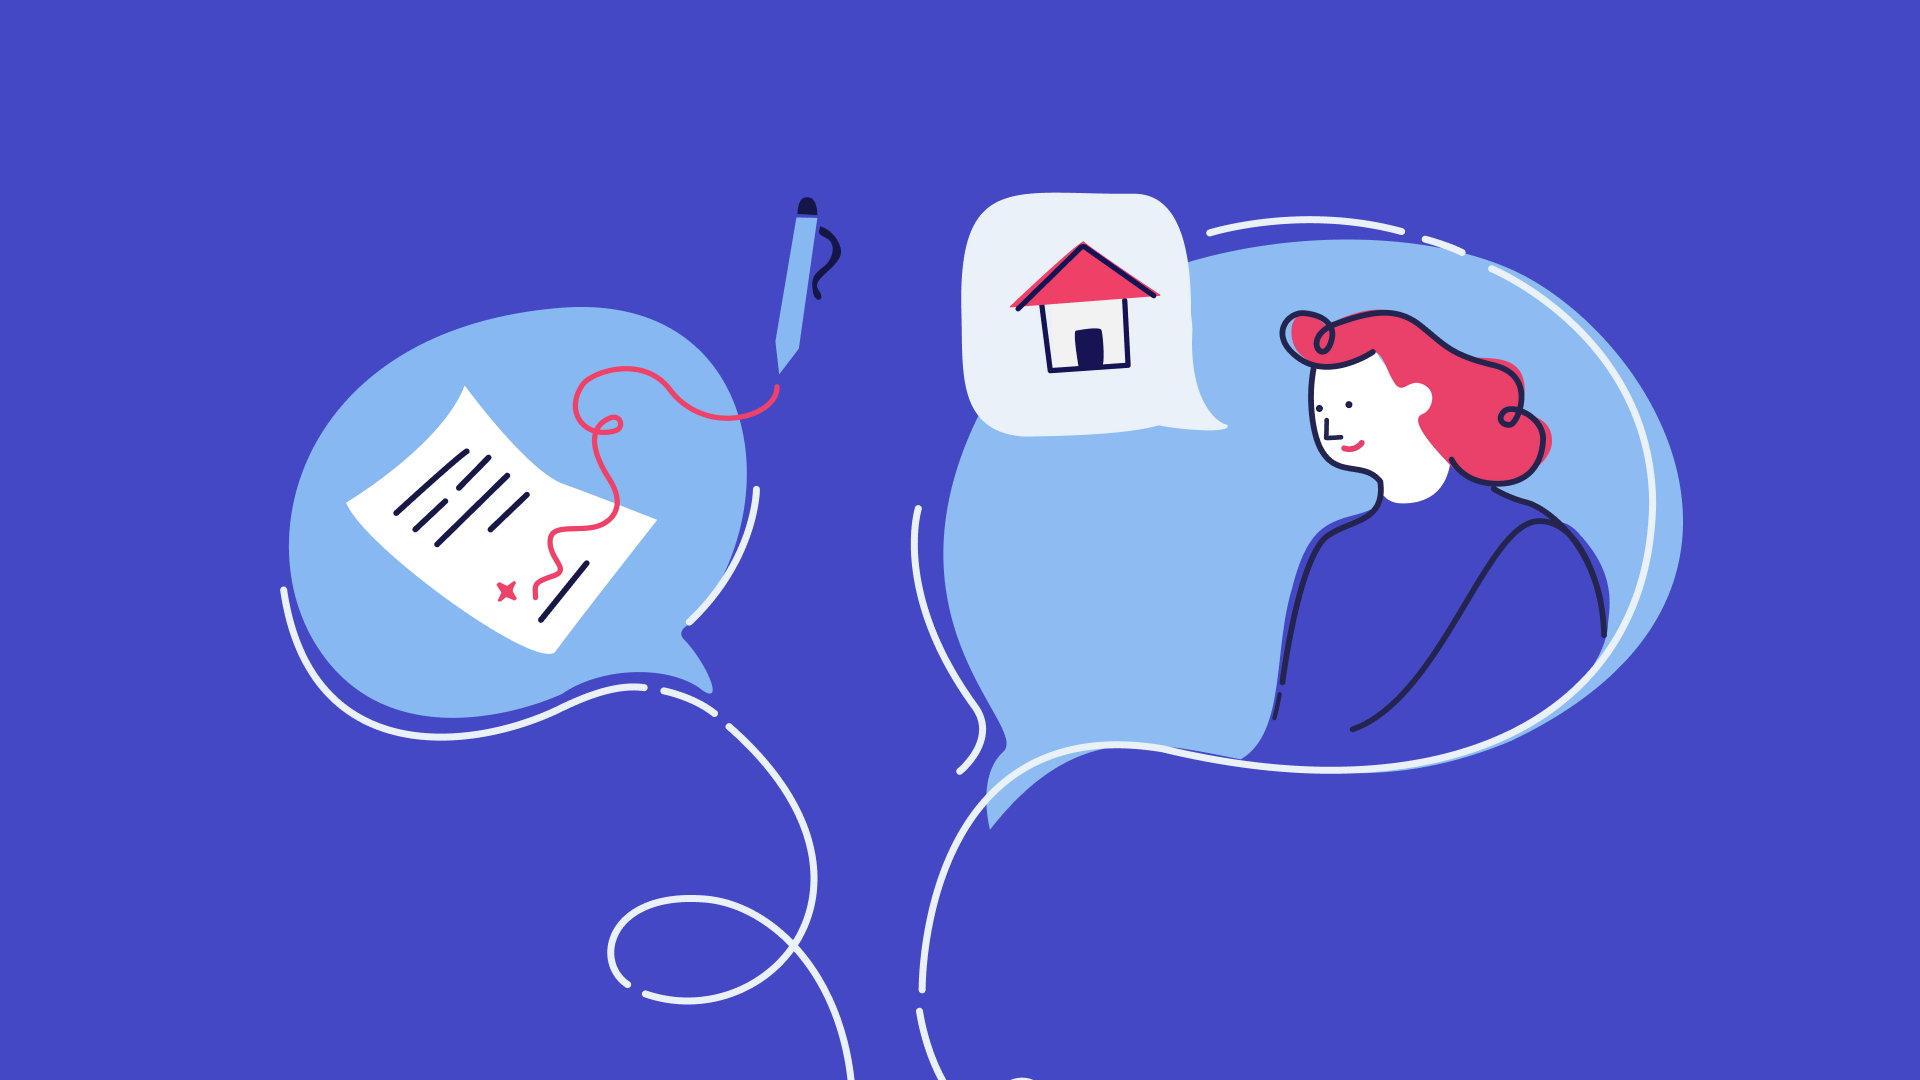 5 Ways Conversational AI is Redefining the Home Buying Experience